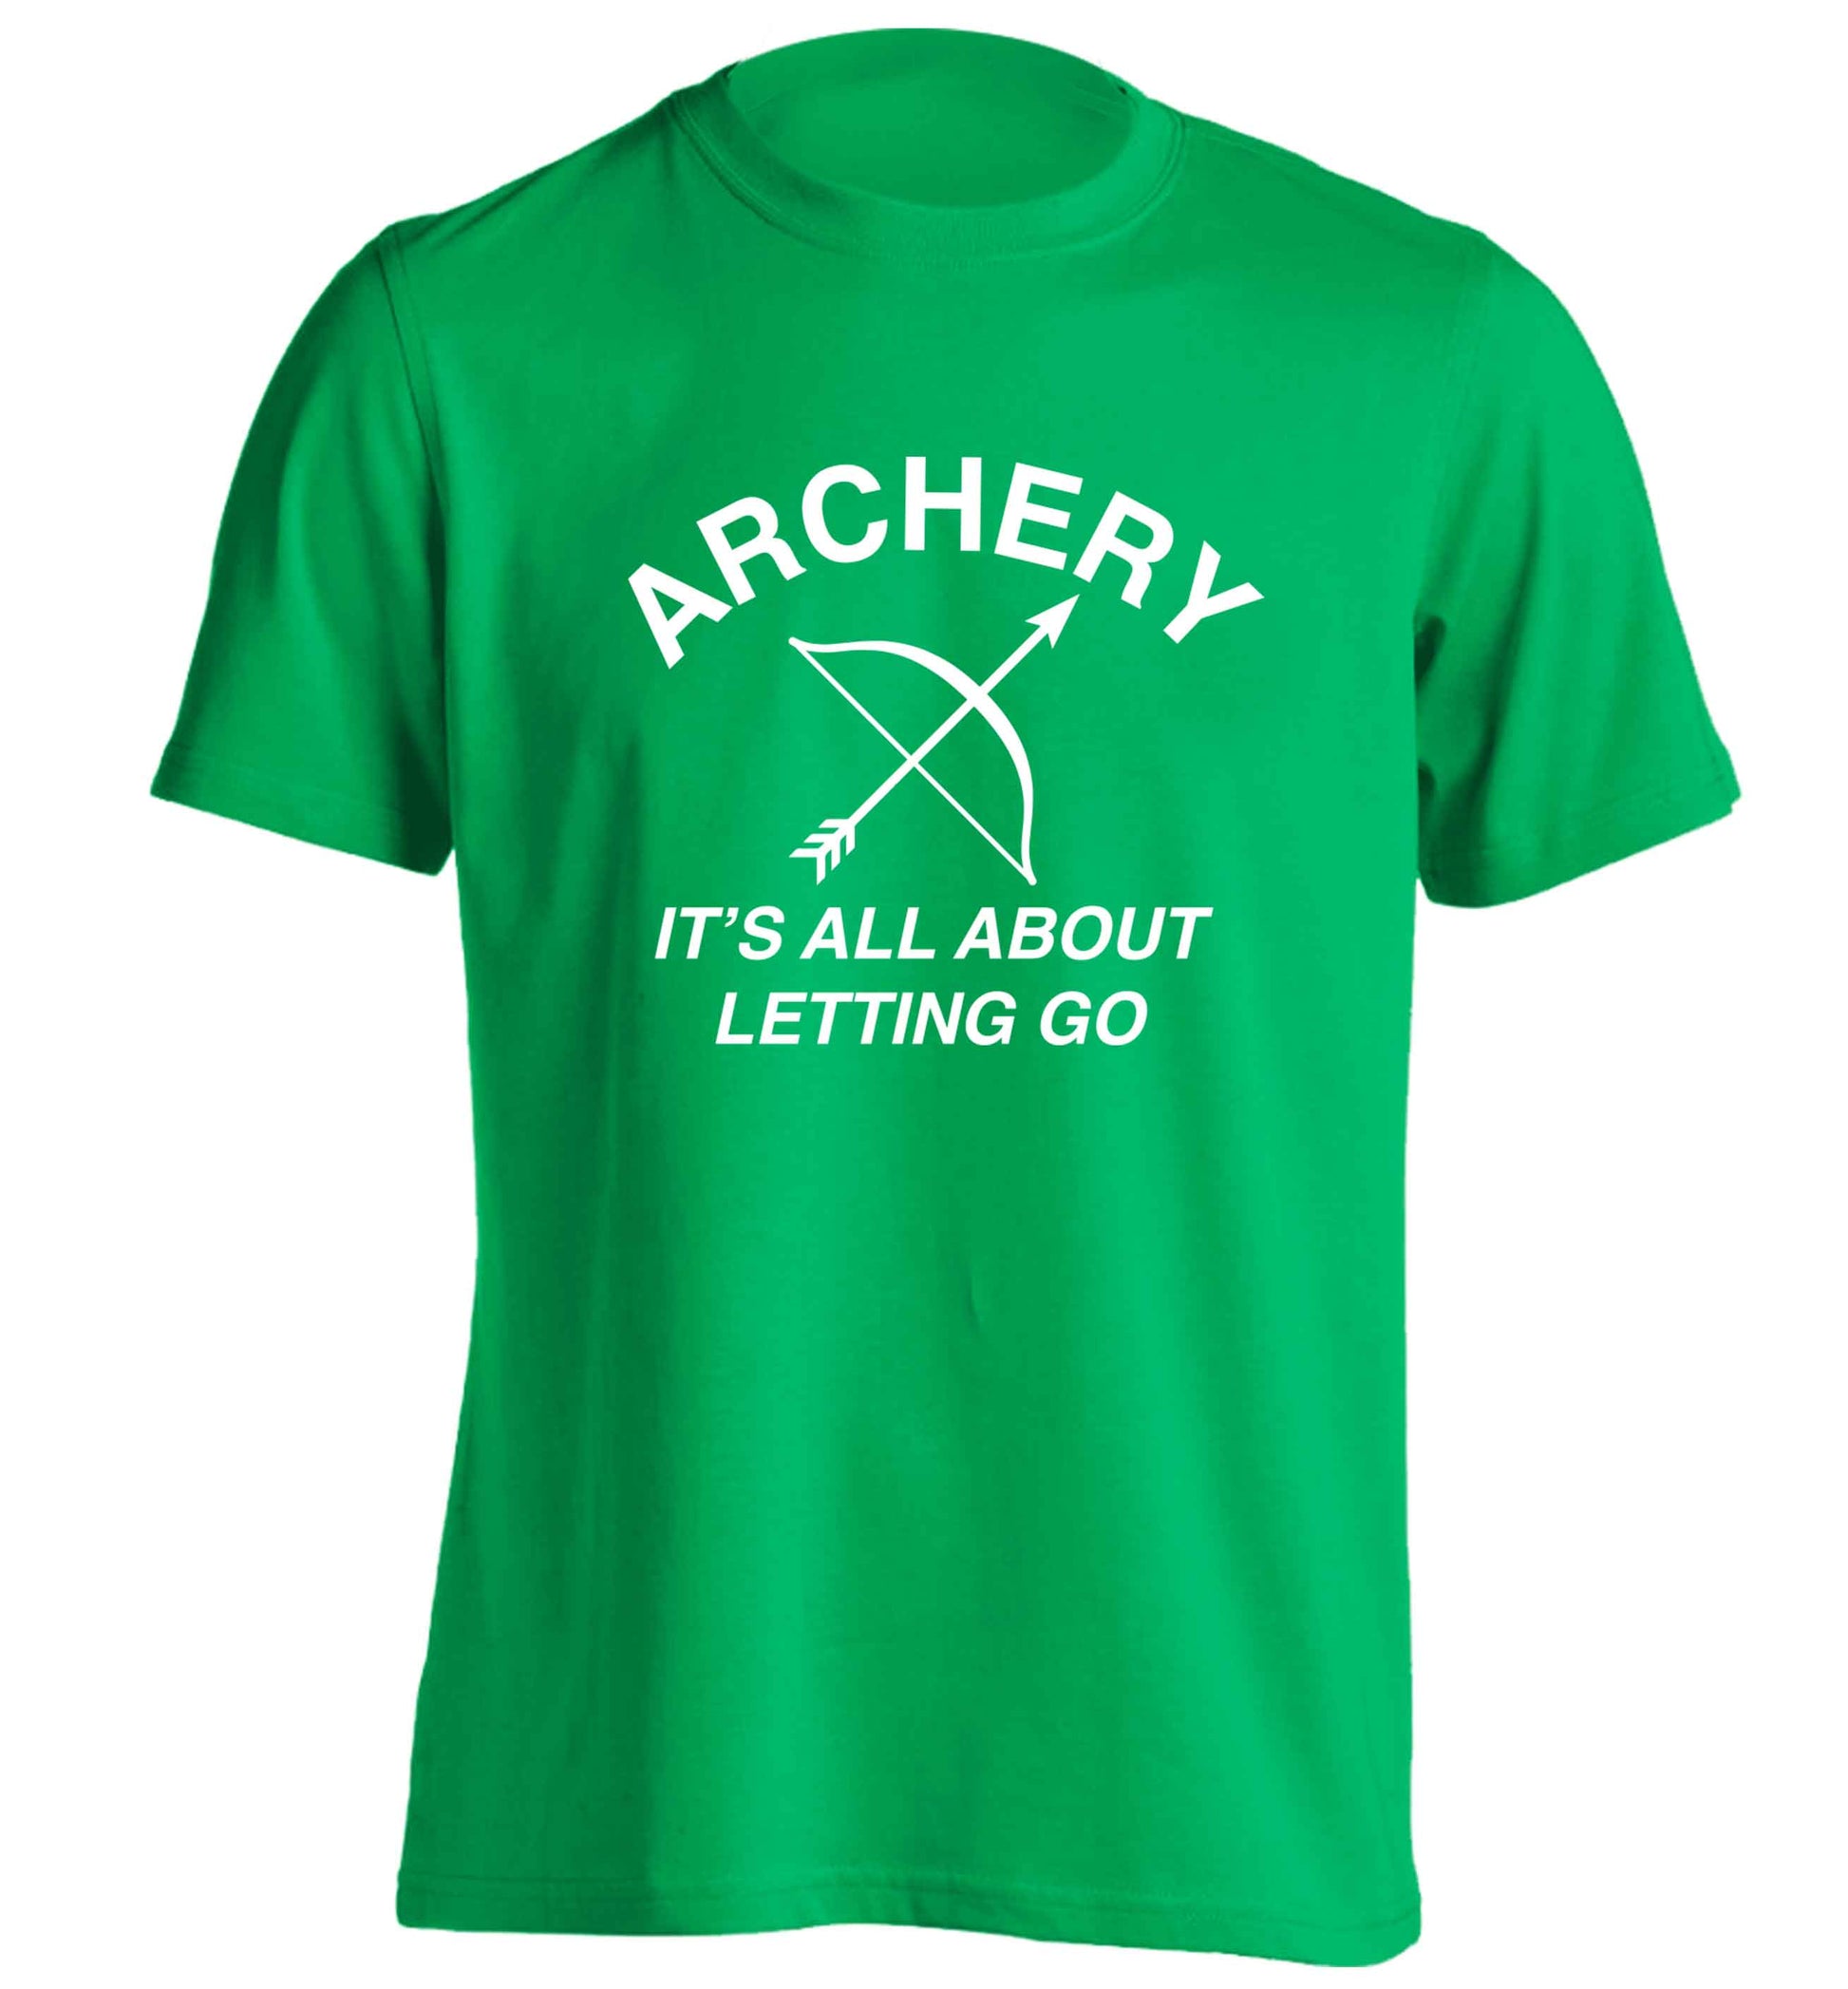 Archery it's all about letting go adults unisex green Tshirt 2XL